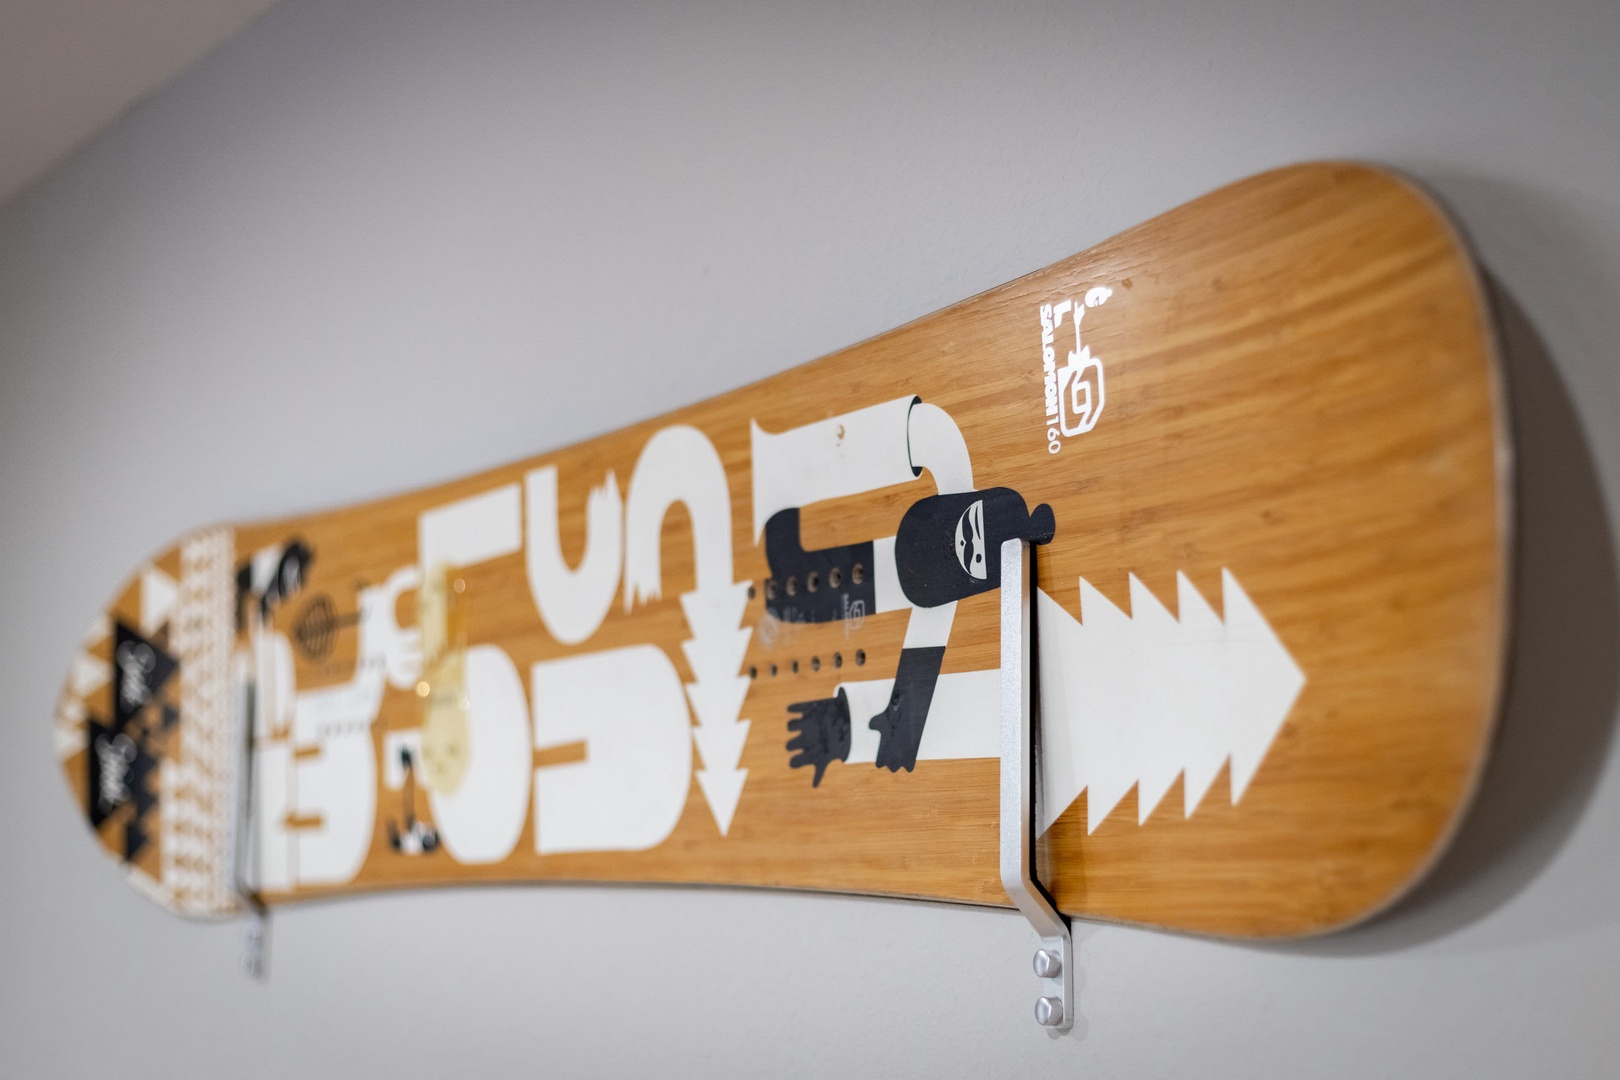 Snowboard on game room wall as decor